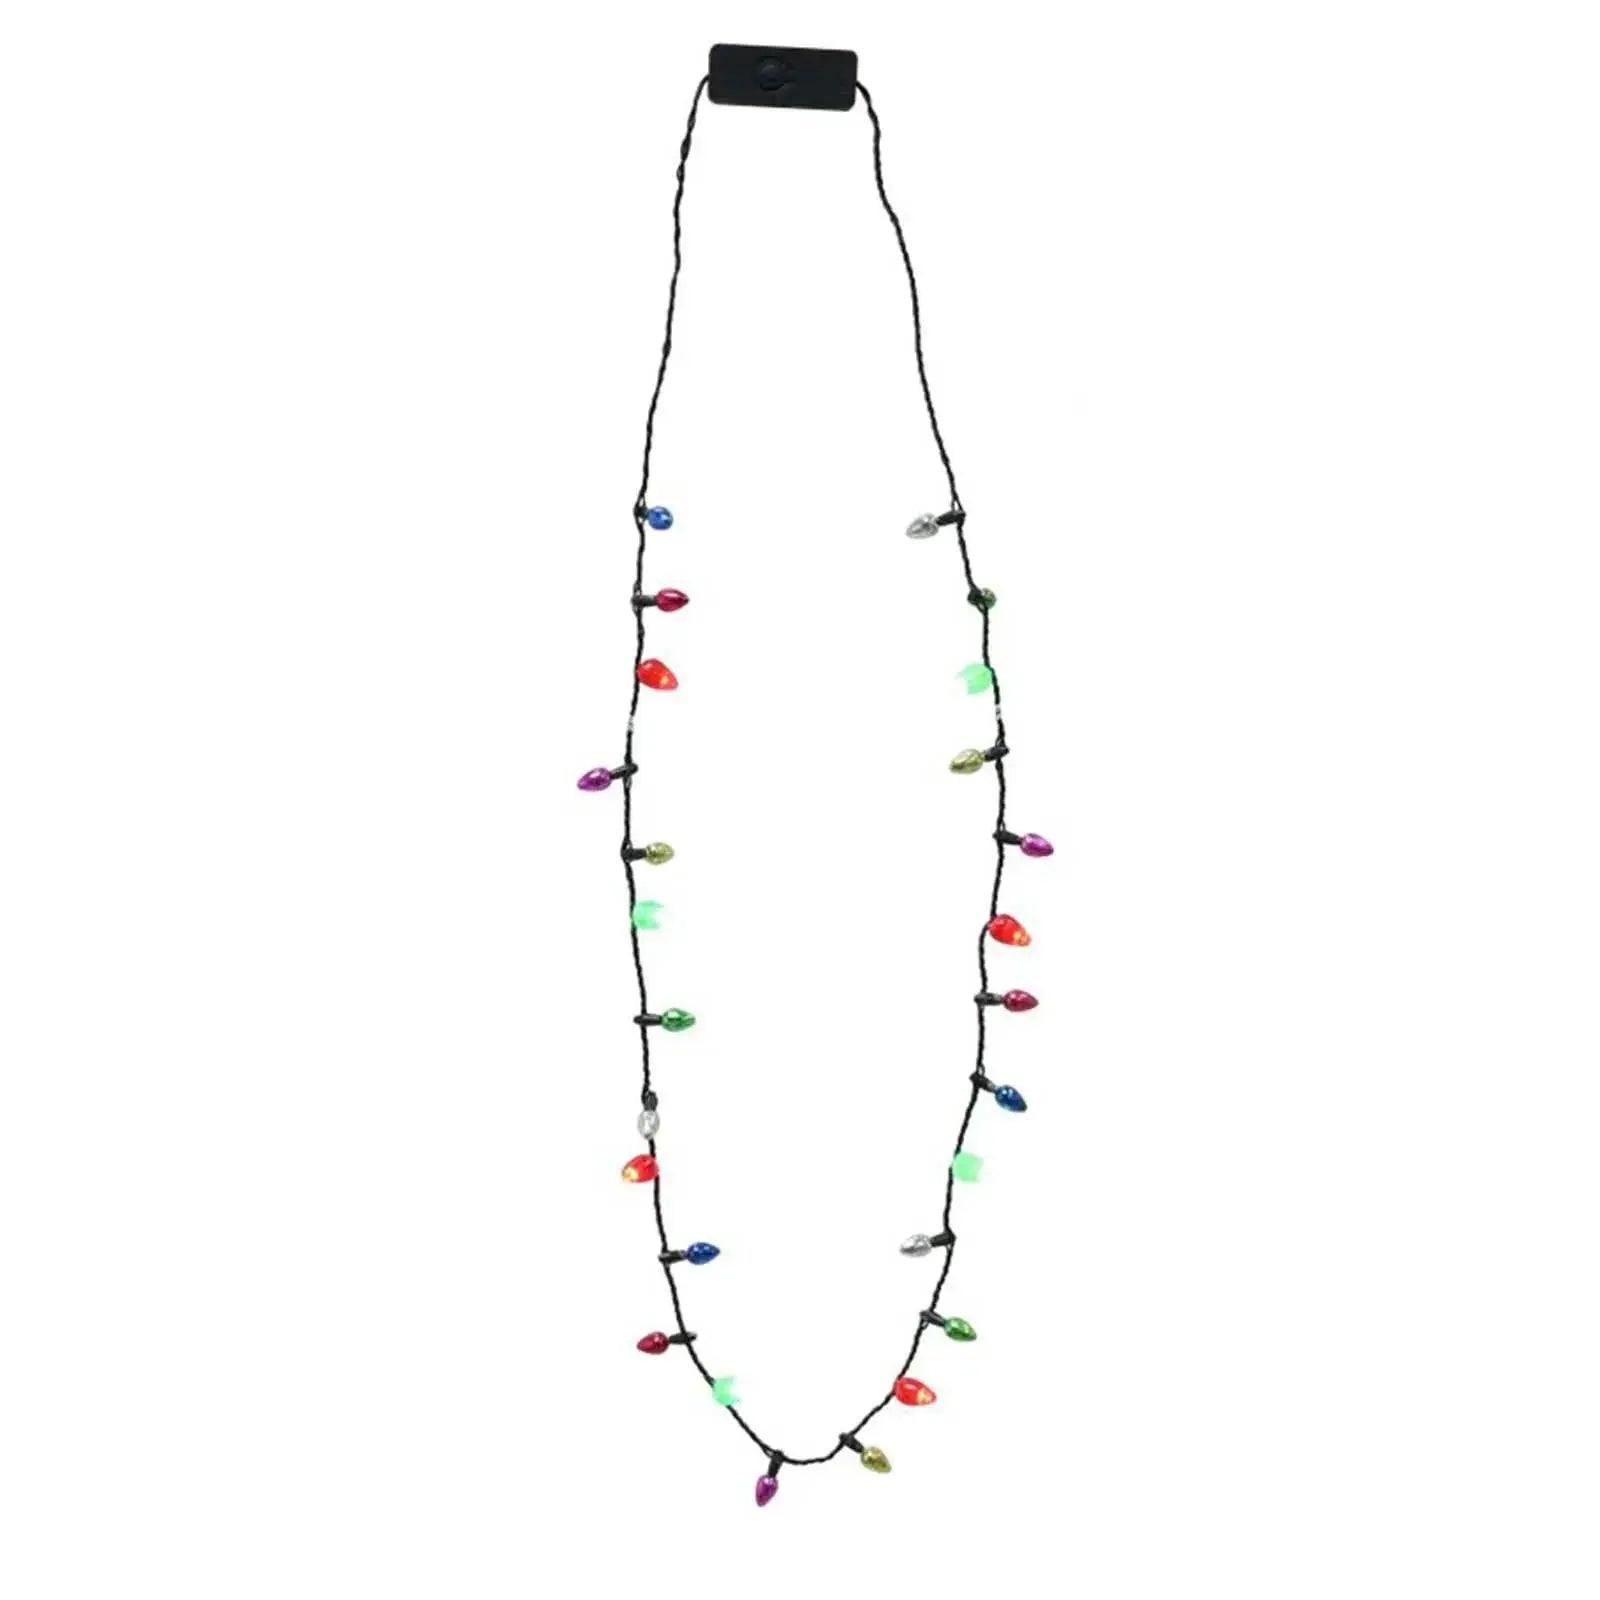 Flashing Light Necklace | The Party Hut